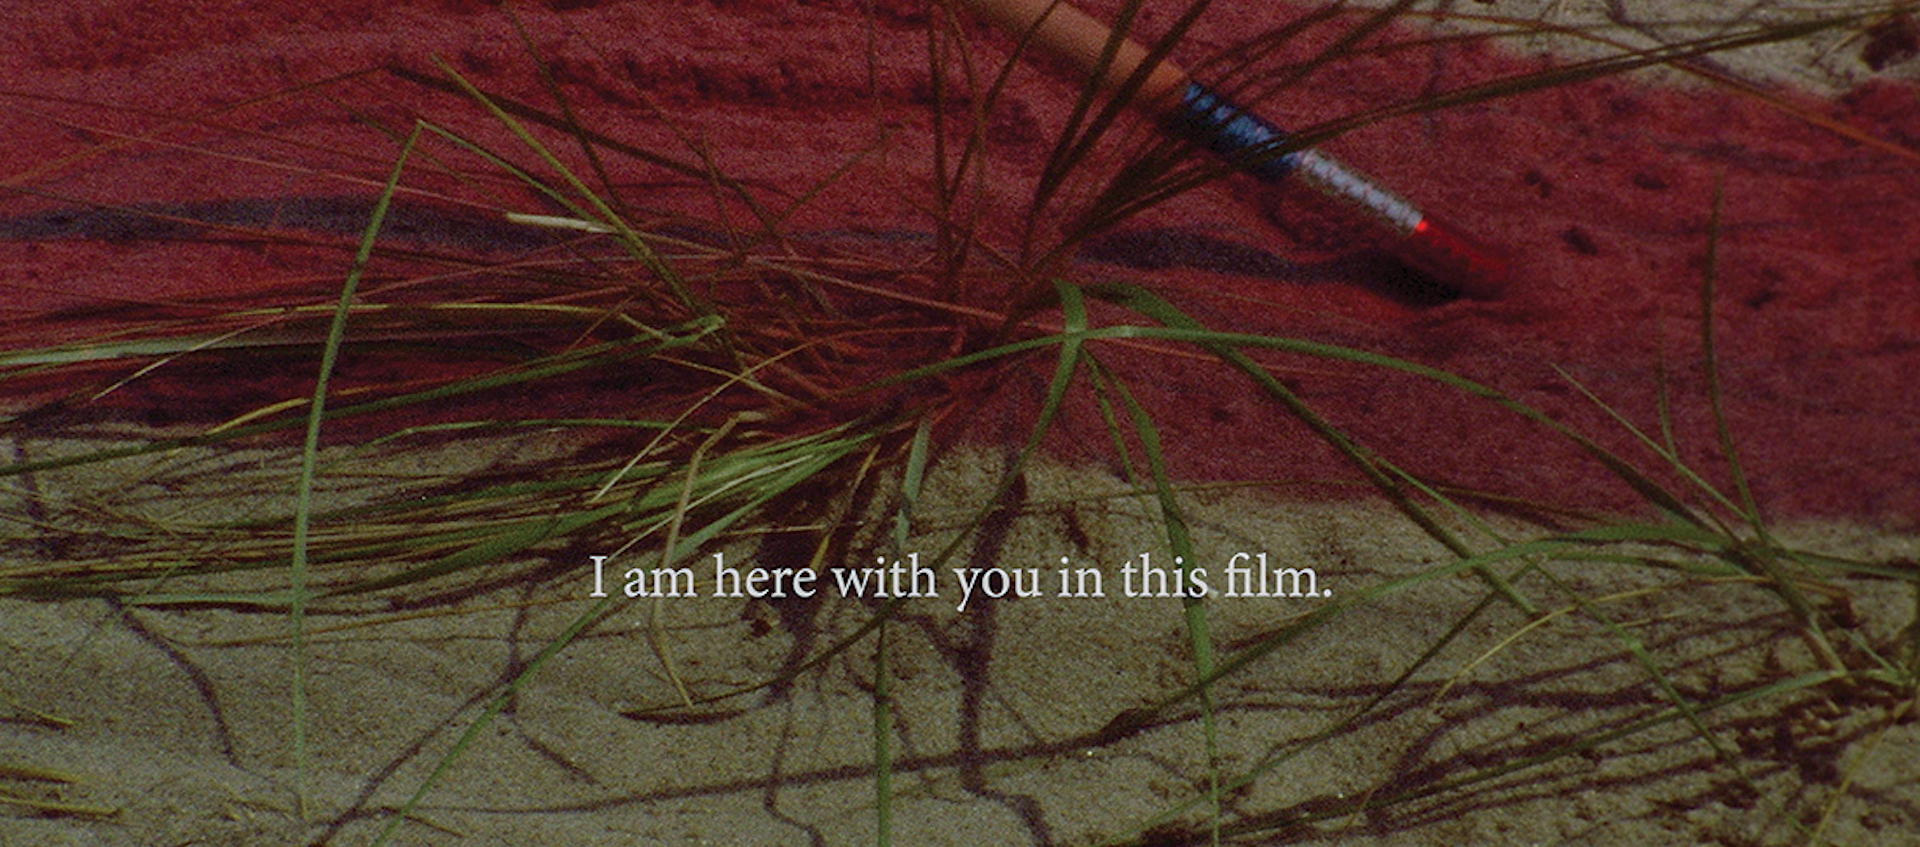 Still from the film A Month of Single Frames, a collaboration between filmmakers Barbara Hammer and Lynn Sachs